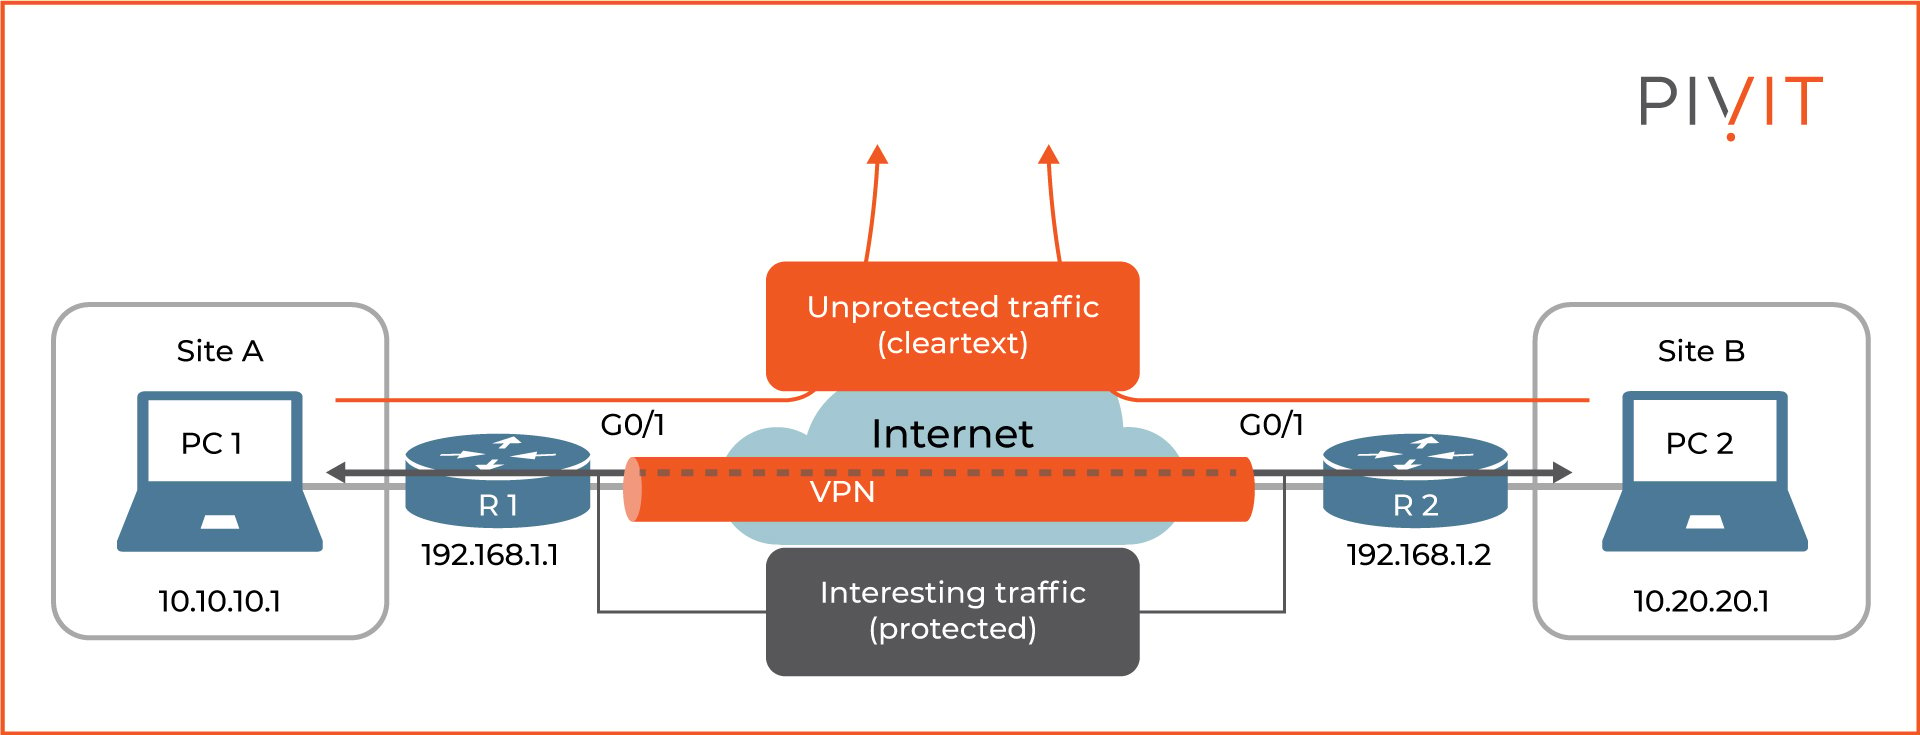 VPN protects the interesting traffic, while unprotected traffic is sent in cleartext